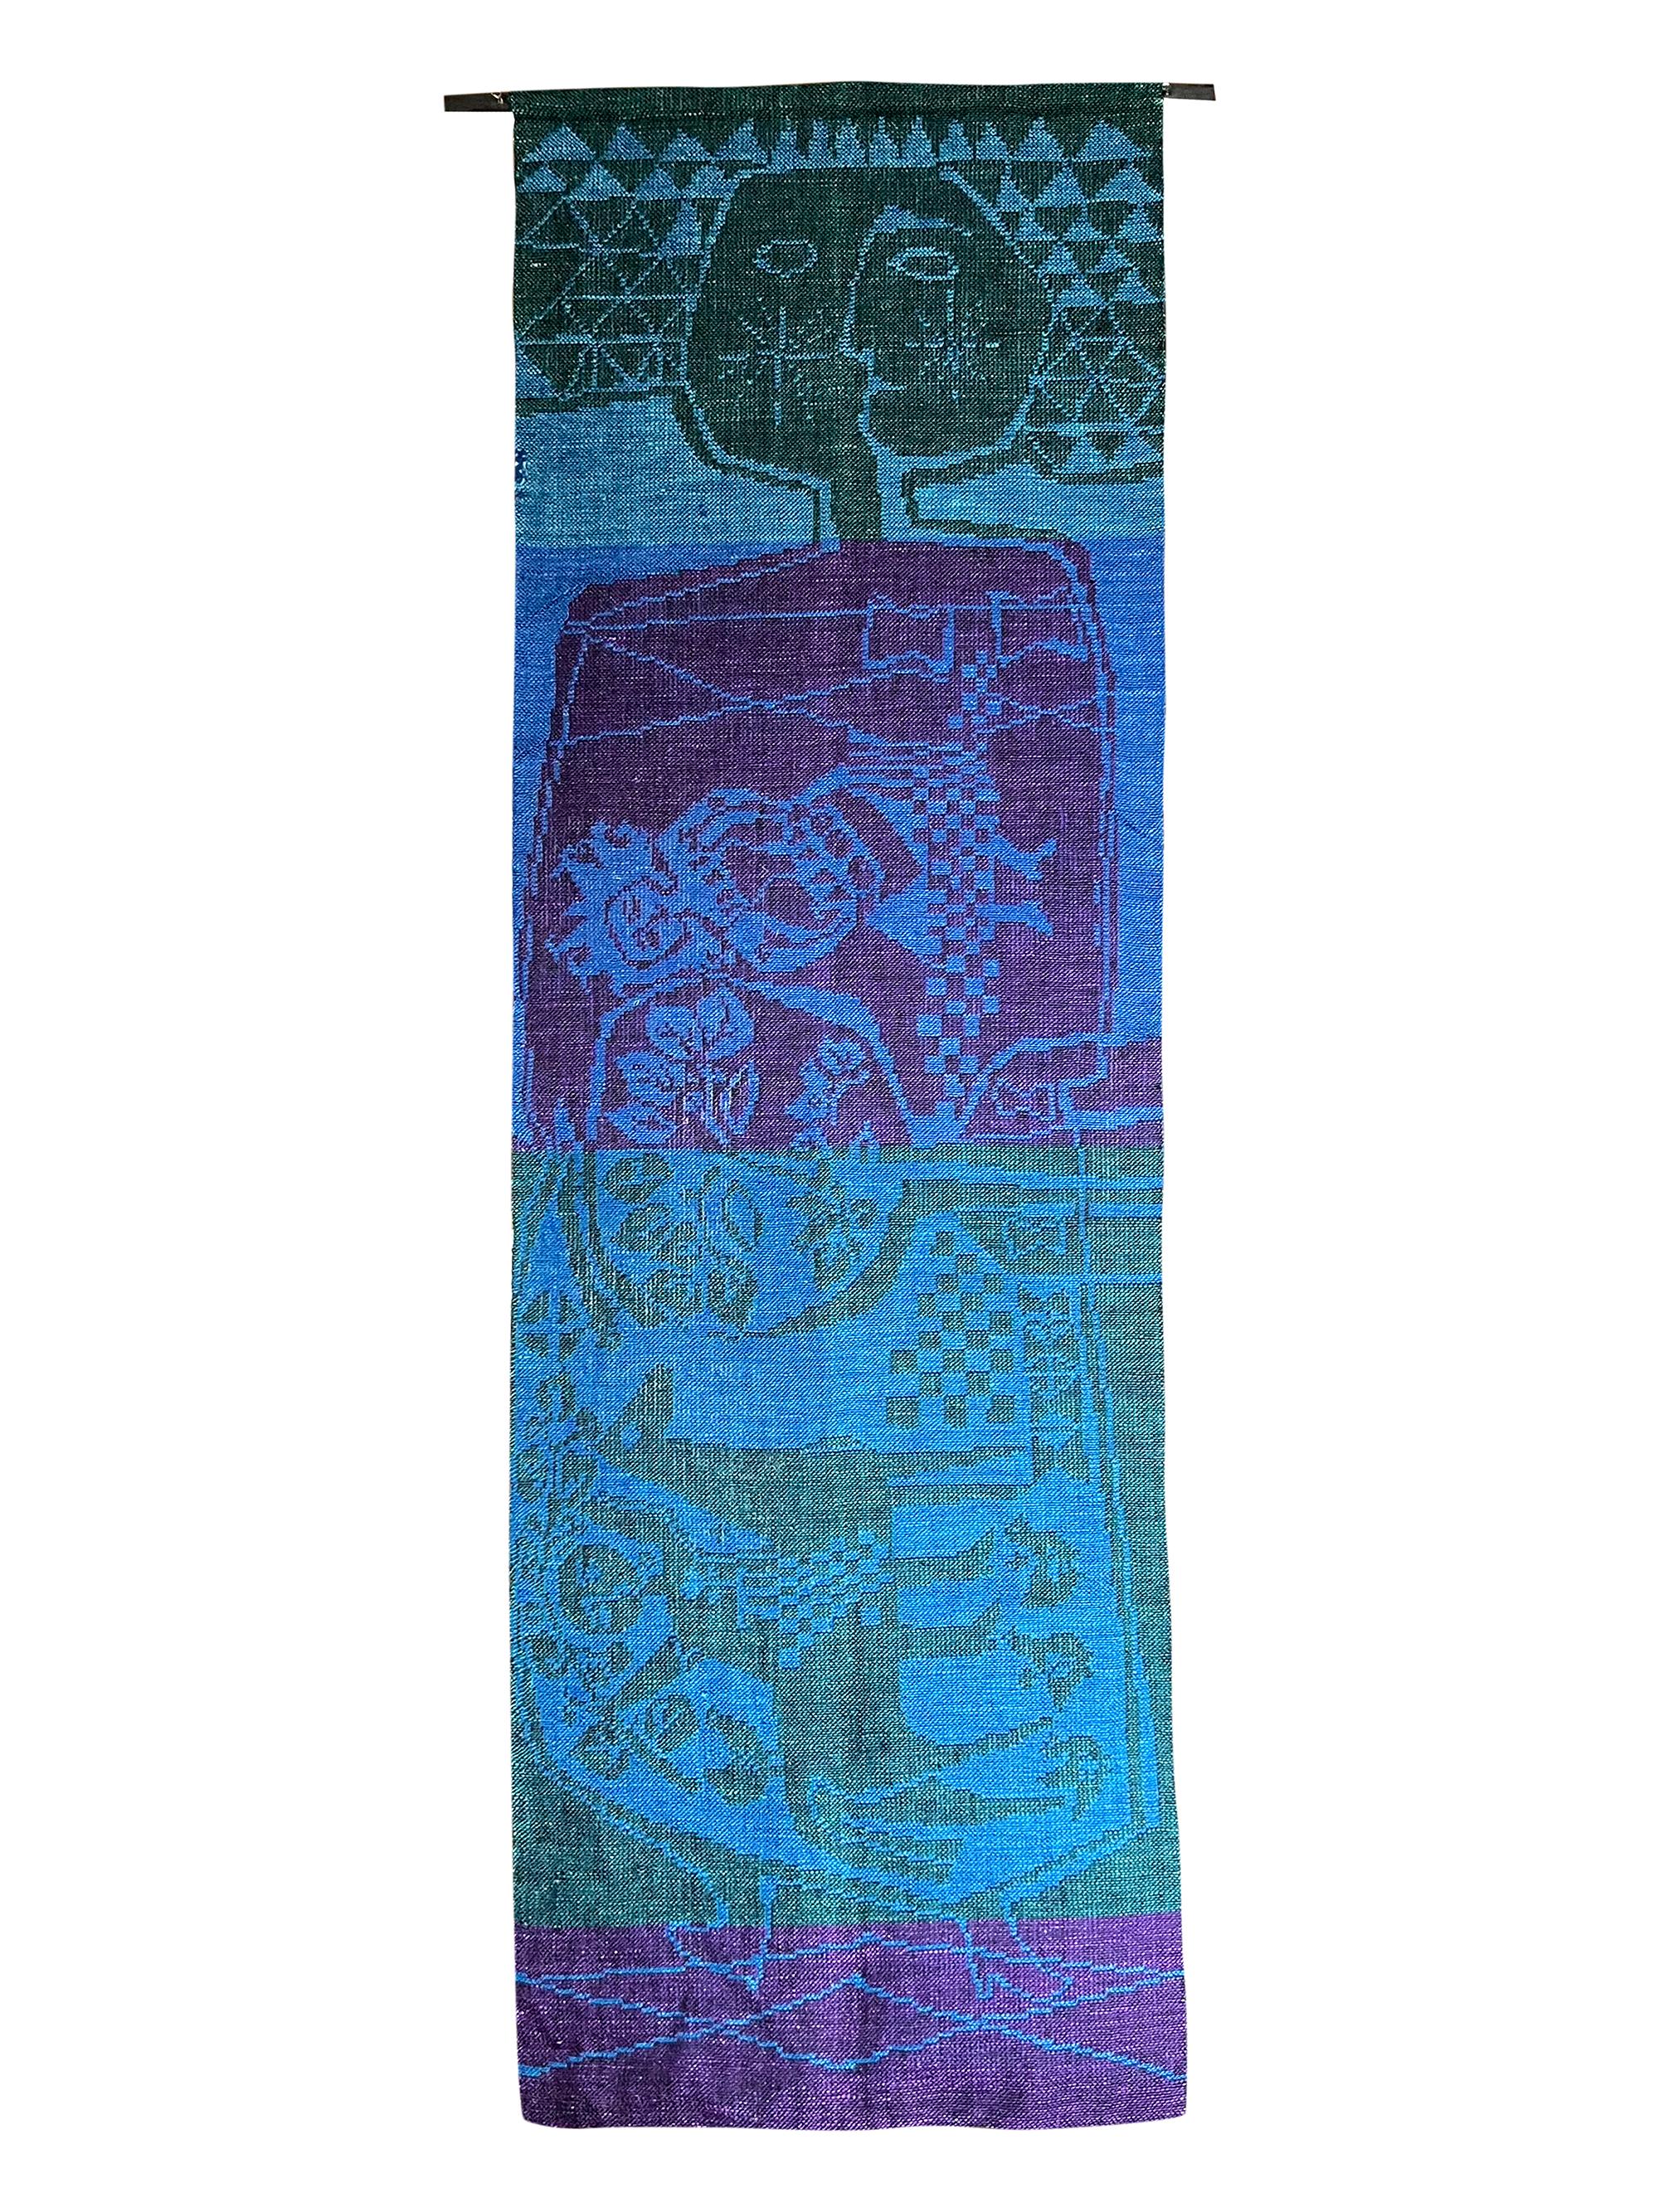 Woven linen in brilliant blues, green and purple depicting a figure on a horse and stylized trees all within a larger male figure, created by the Finnish textile designer of fiber art Kirsti Rantanen of Finland, circa 1960's. Piece measures 80